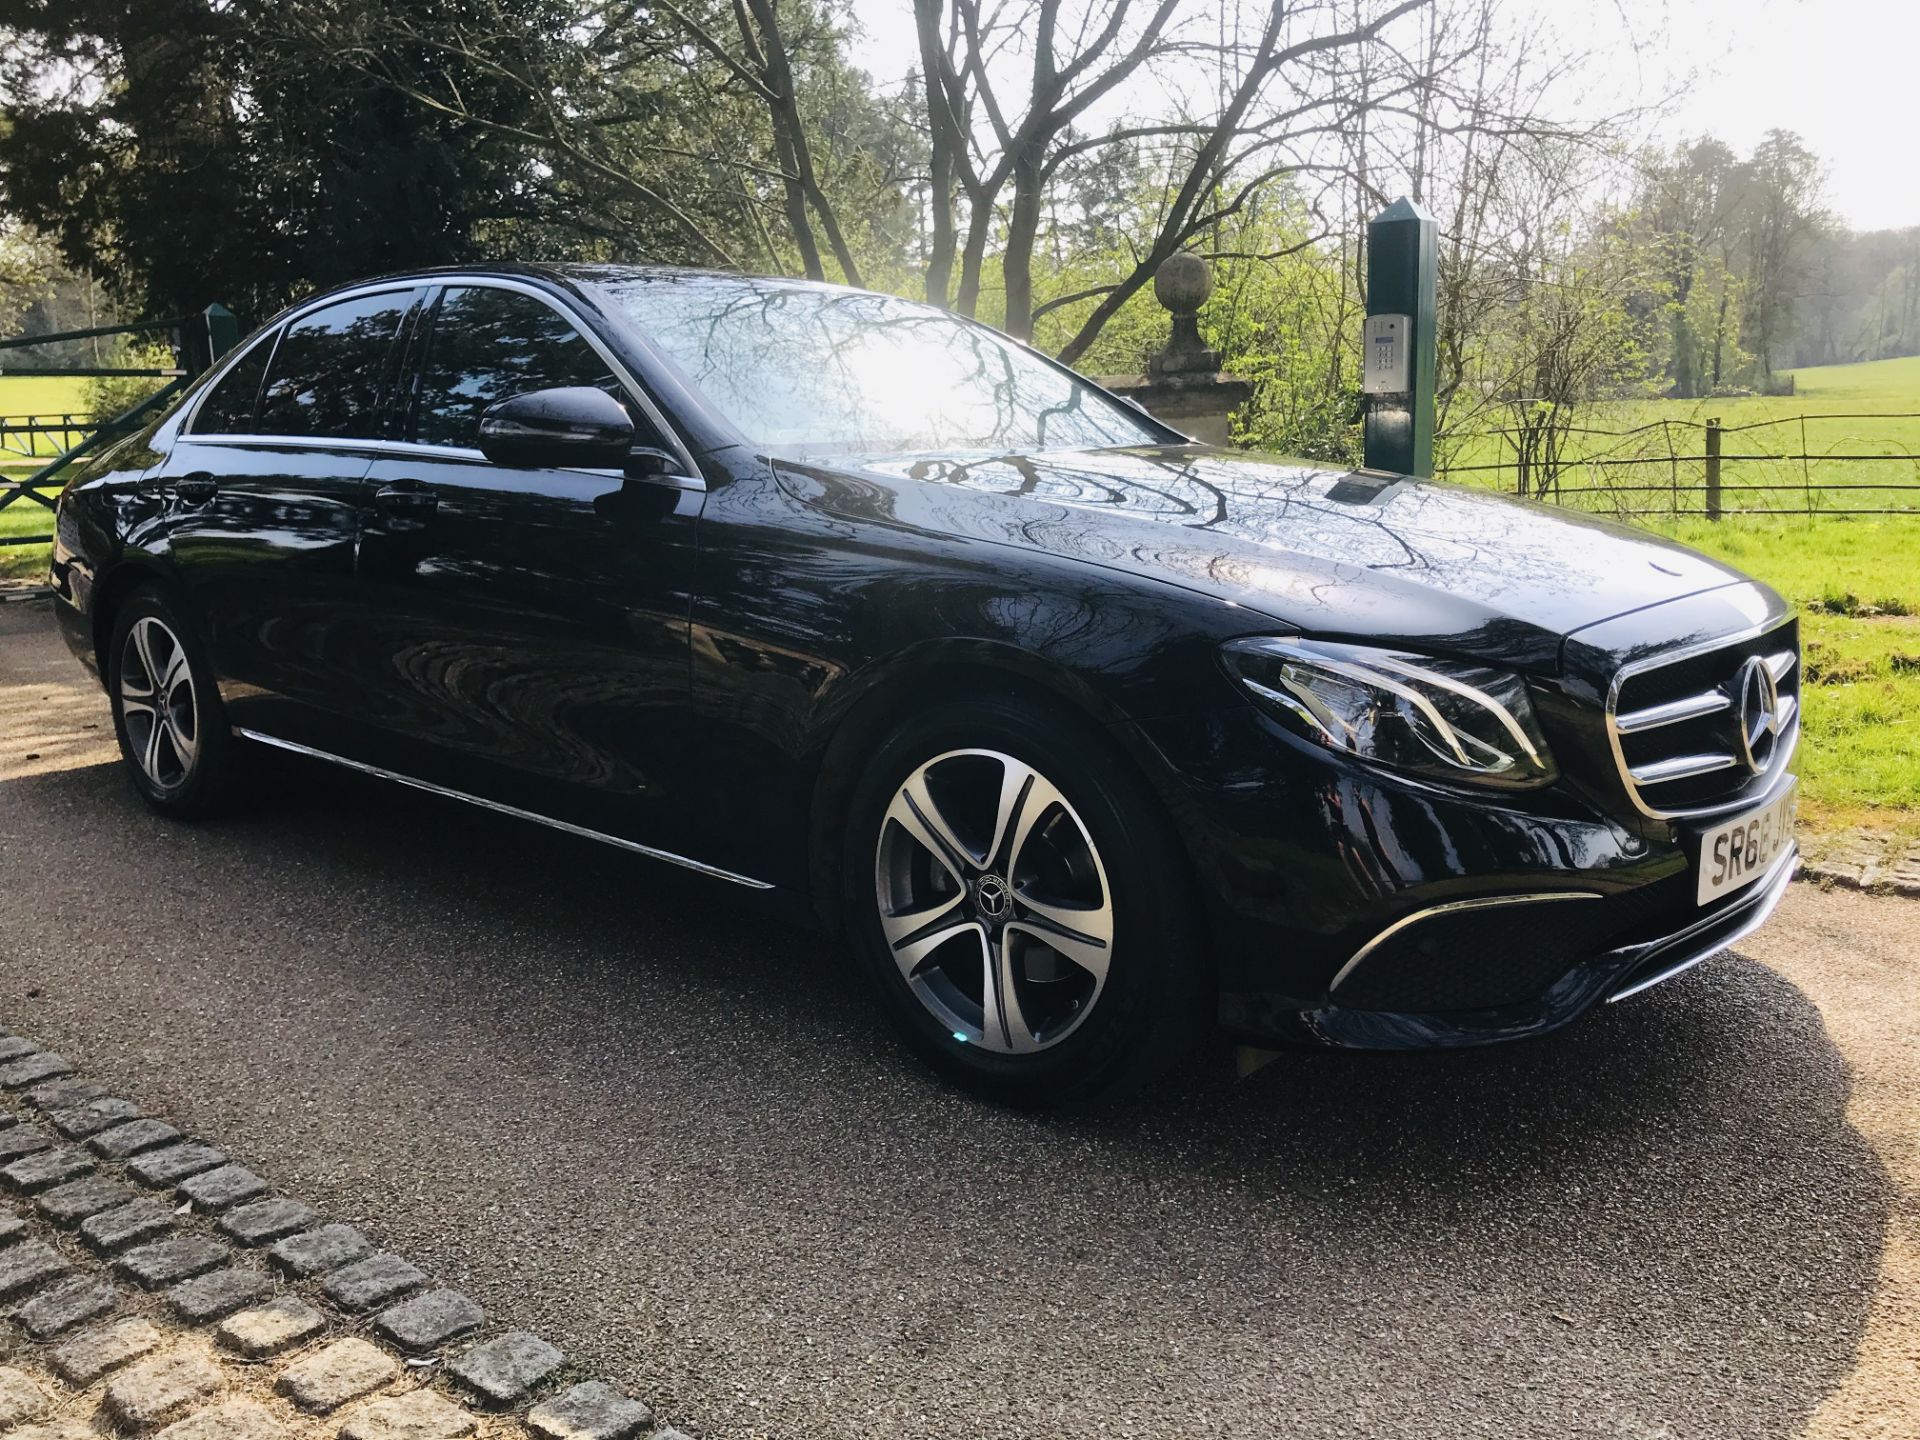 On Sale MERCEDES E220d "SPECIAL EQUIPMENT" 9G TRONIC (2019 MODEL) 1 OWNER - SAT NAV - LEATHER - WOW! - Image 2 of 26